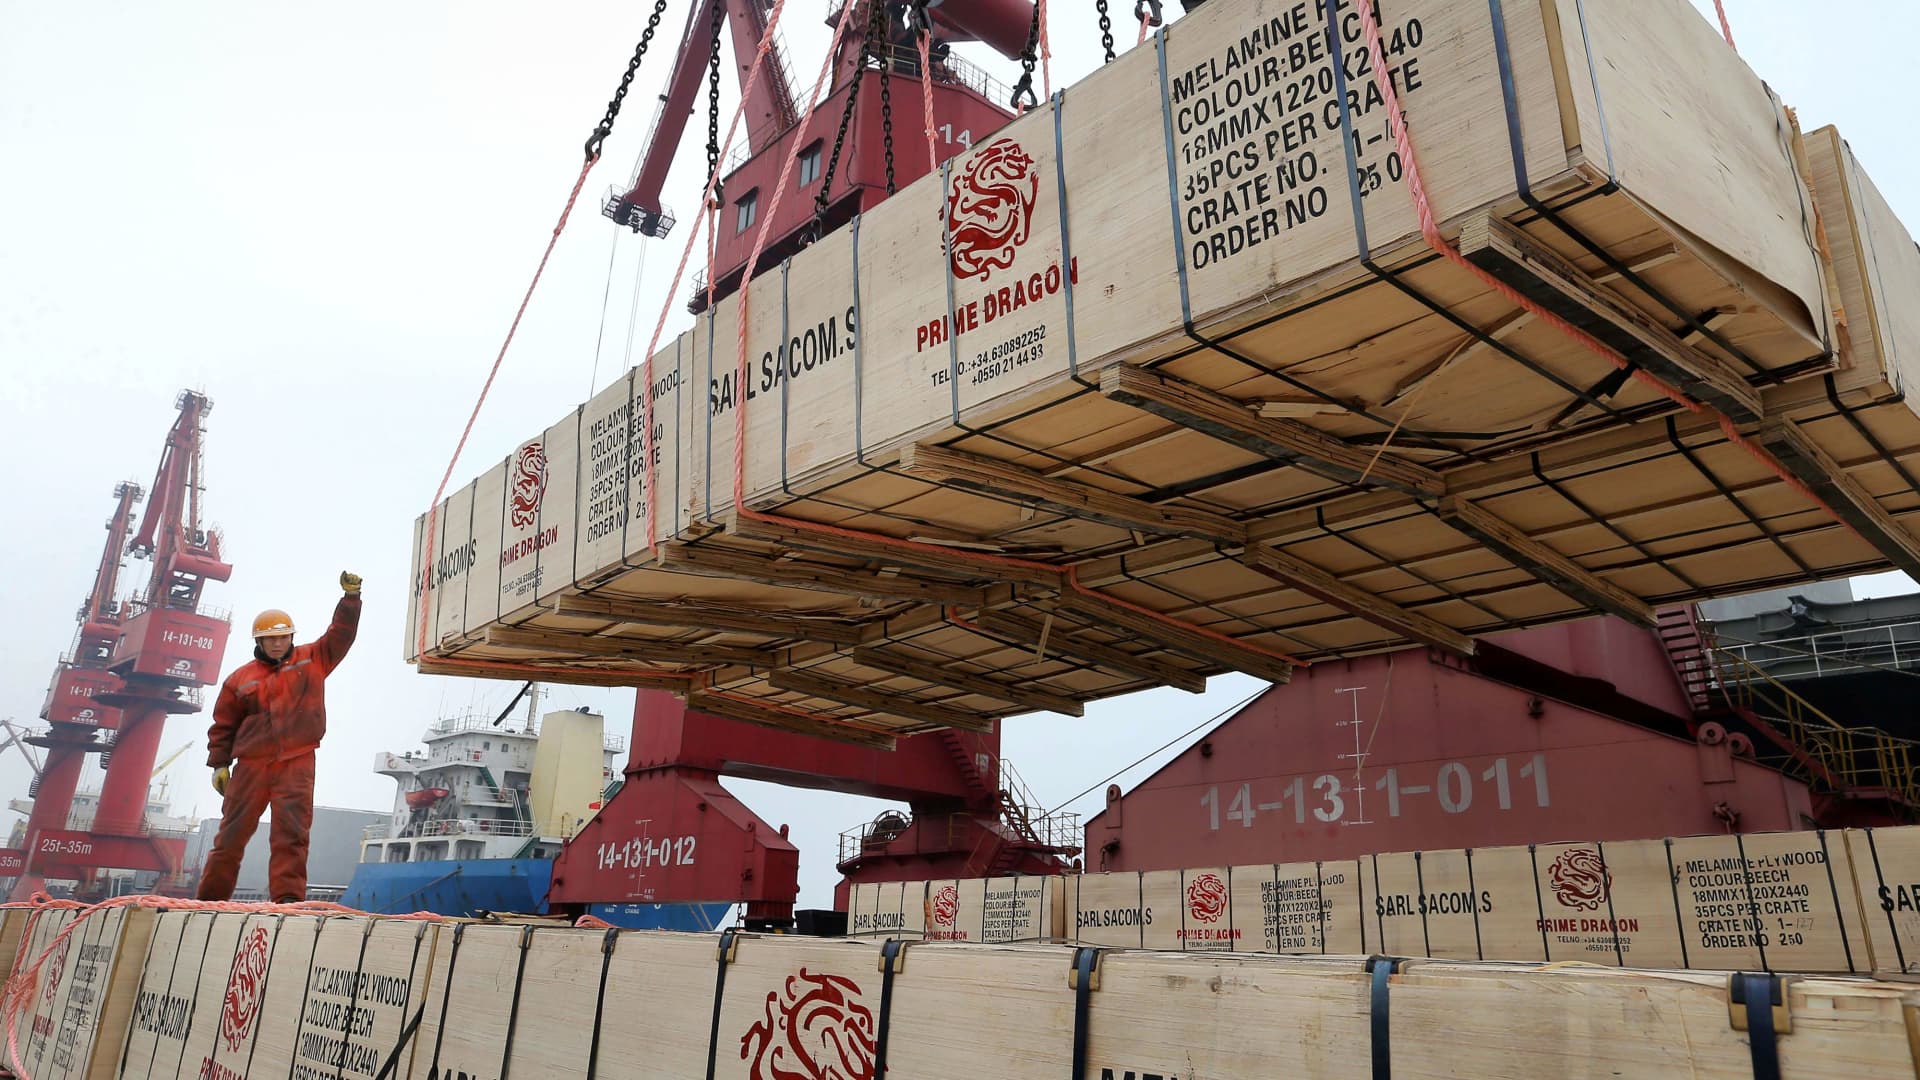 A worker gestures as a crane lifts goods for export onto a cargo vessel at a port in Lianyungang, China, February 13, 2019.